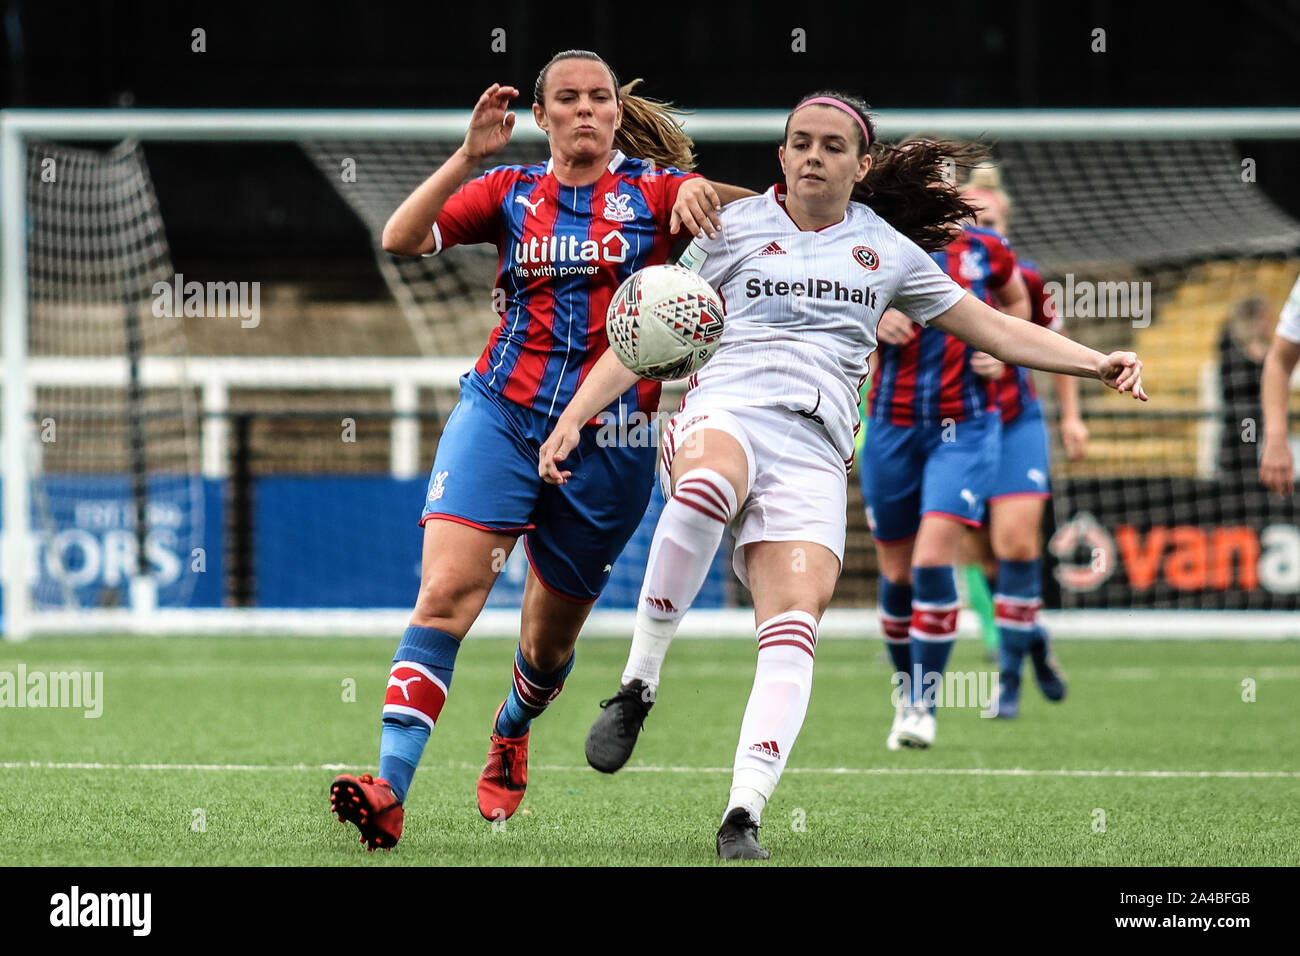 Bromley, UK. 13th Oct, 2019. LONDON, UNITED KINGDOM OCTOBER 13. Sam Tierney of Sheffield United Women volleying the ball during FA Women's Championship between Crystal Palace and Sheffield United at Hayes Lane Stadium, Bromley, UK on 13 October 2019 Credit: Action Foto Sport/Alamy Live News Stock Photo